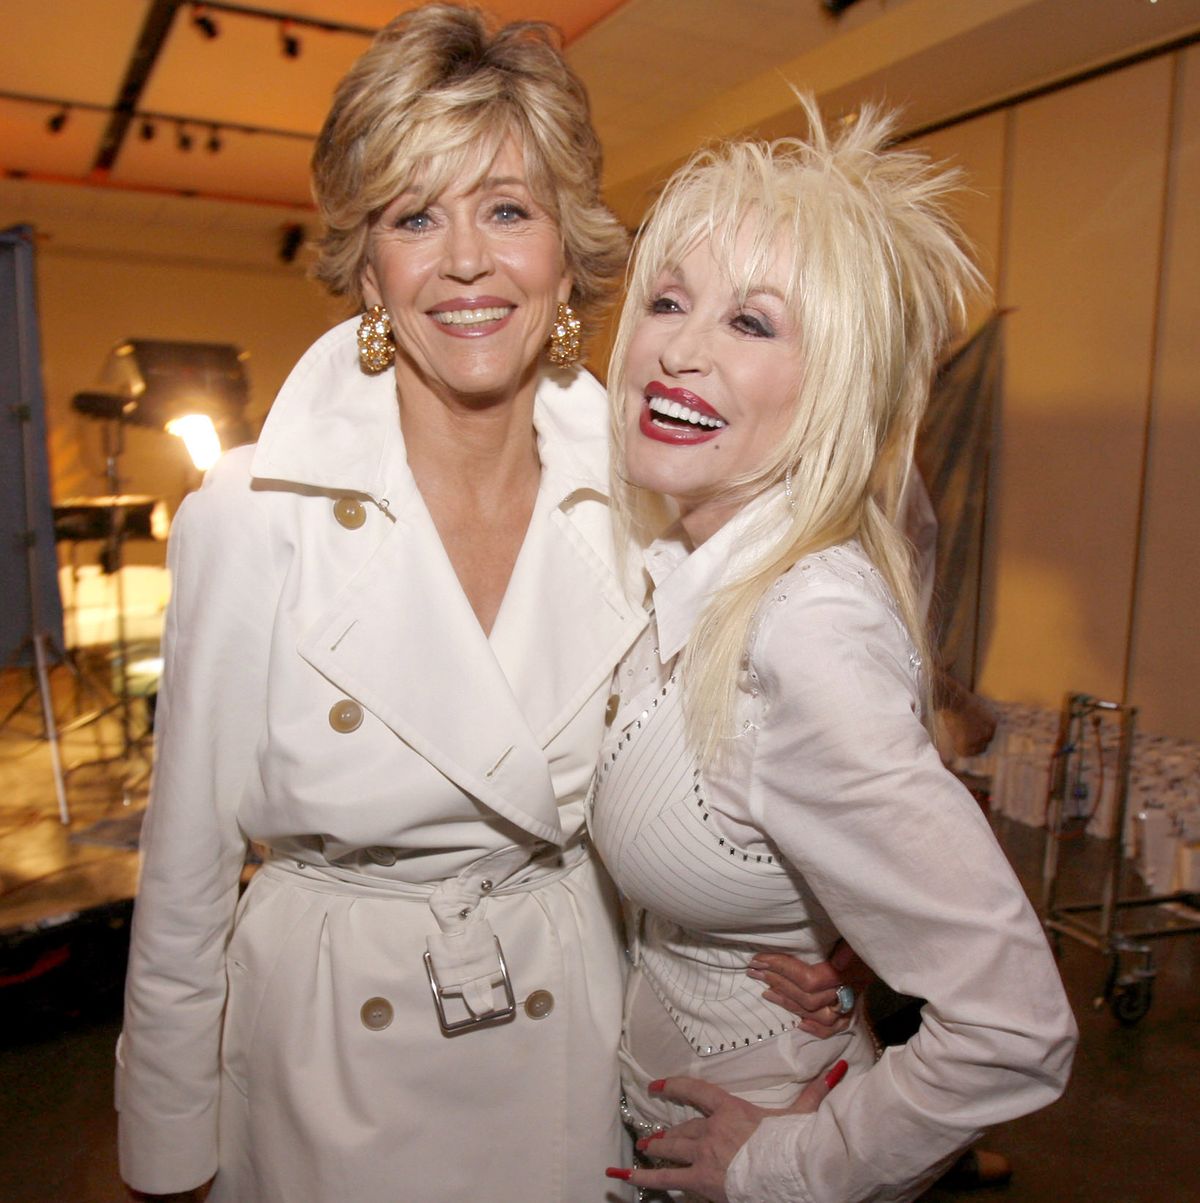 "9 to 5" 25th Anniversary Special Edition DVD Launch Party - March 30, 2006